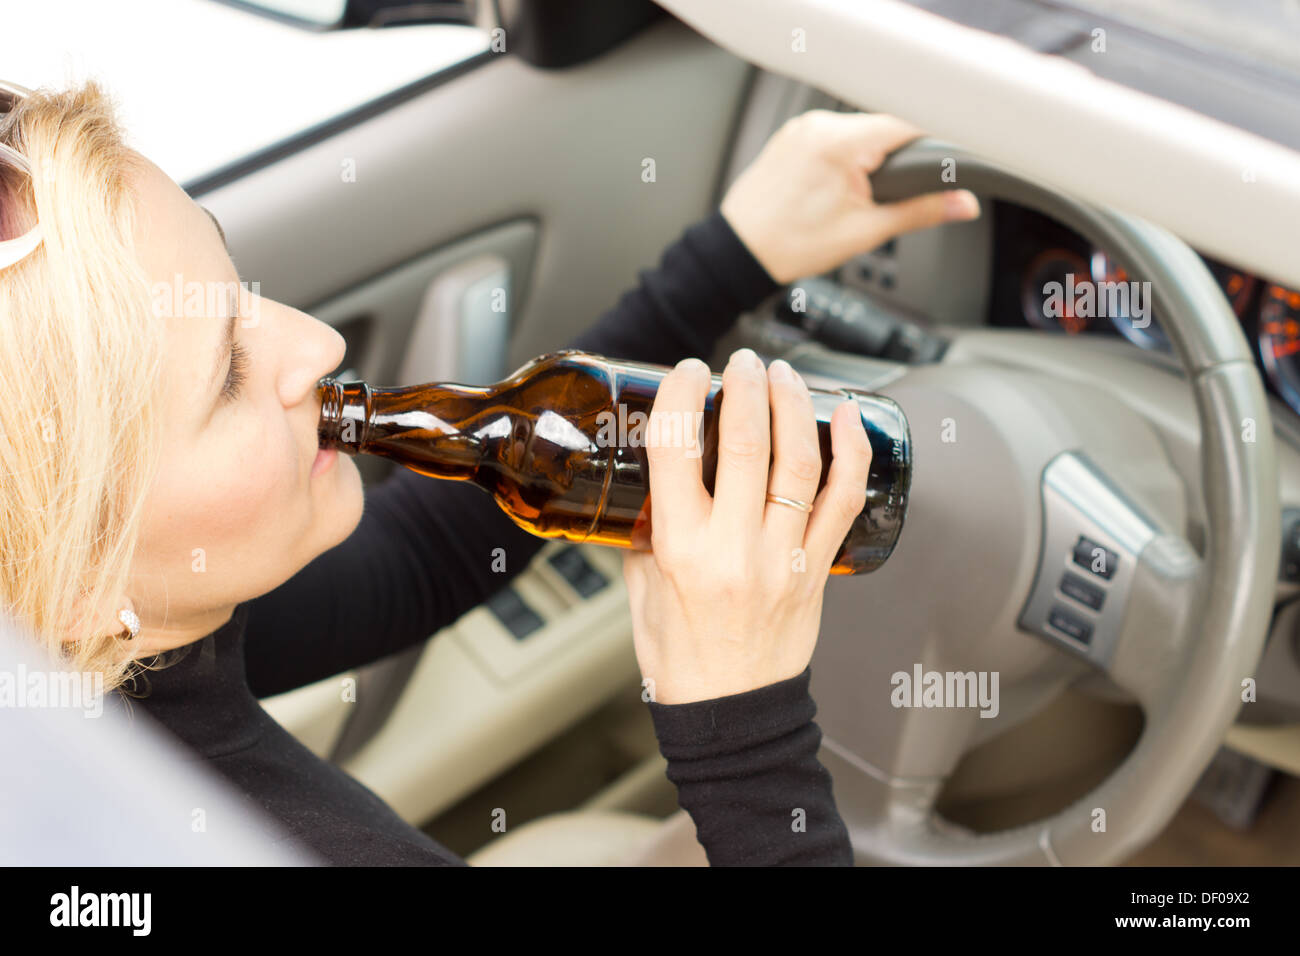 High angle view of a drunk woman driver sitting behind her steering wheel imbibing from a bottle of alcohol as she drives Stock Photo